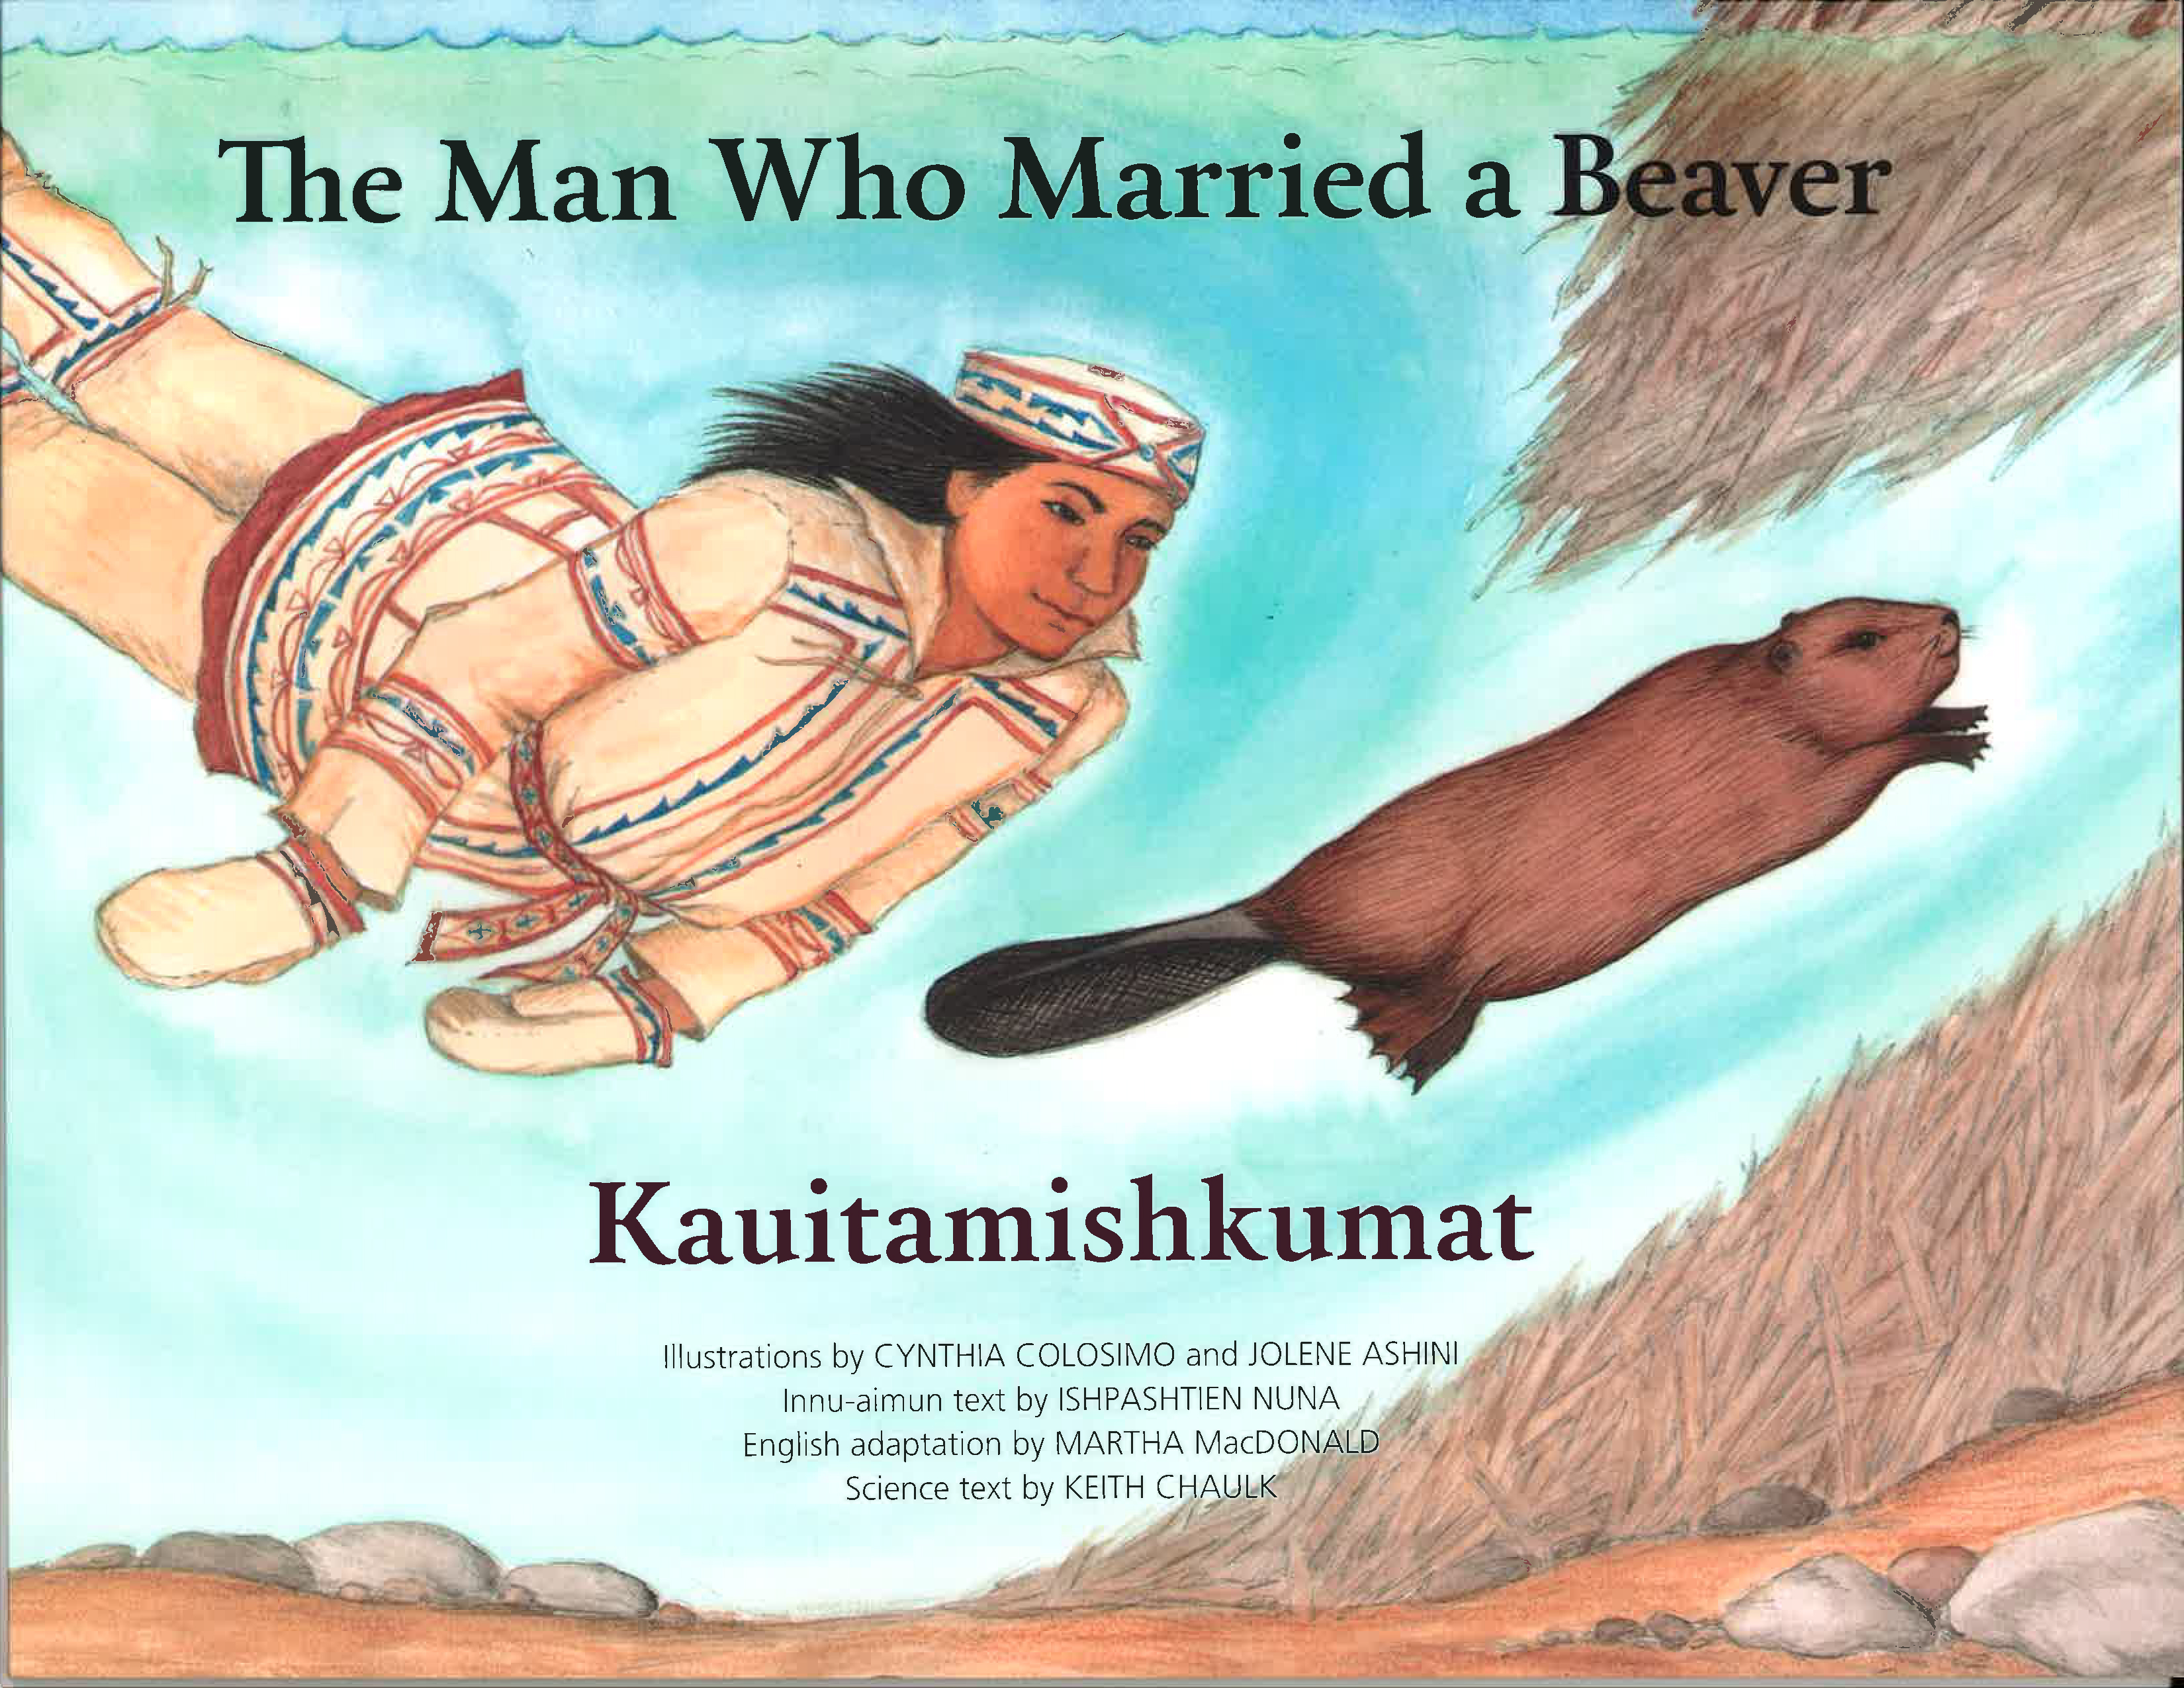 The Labrador Institute has published a new book based on an Innu legend.